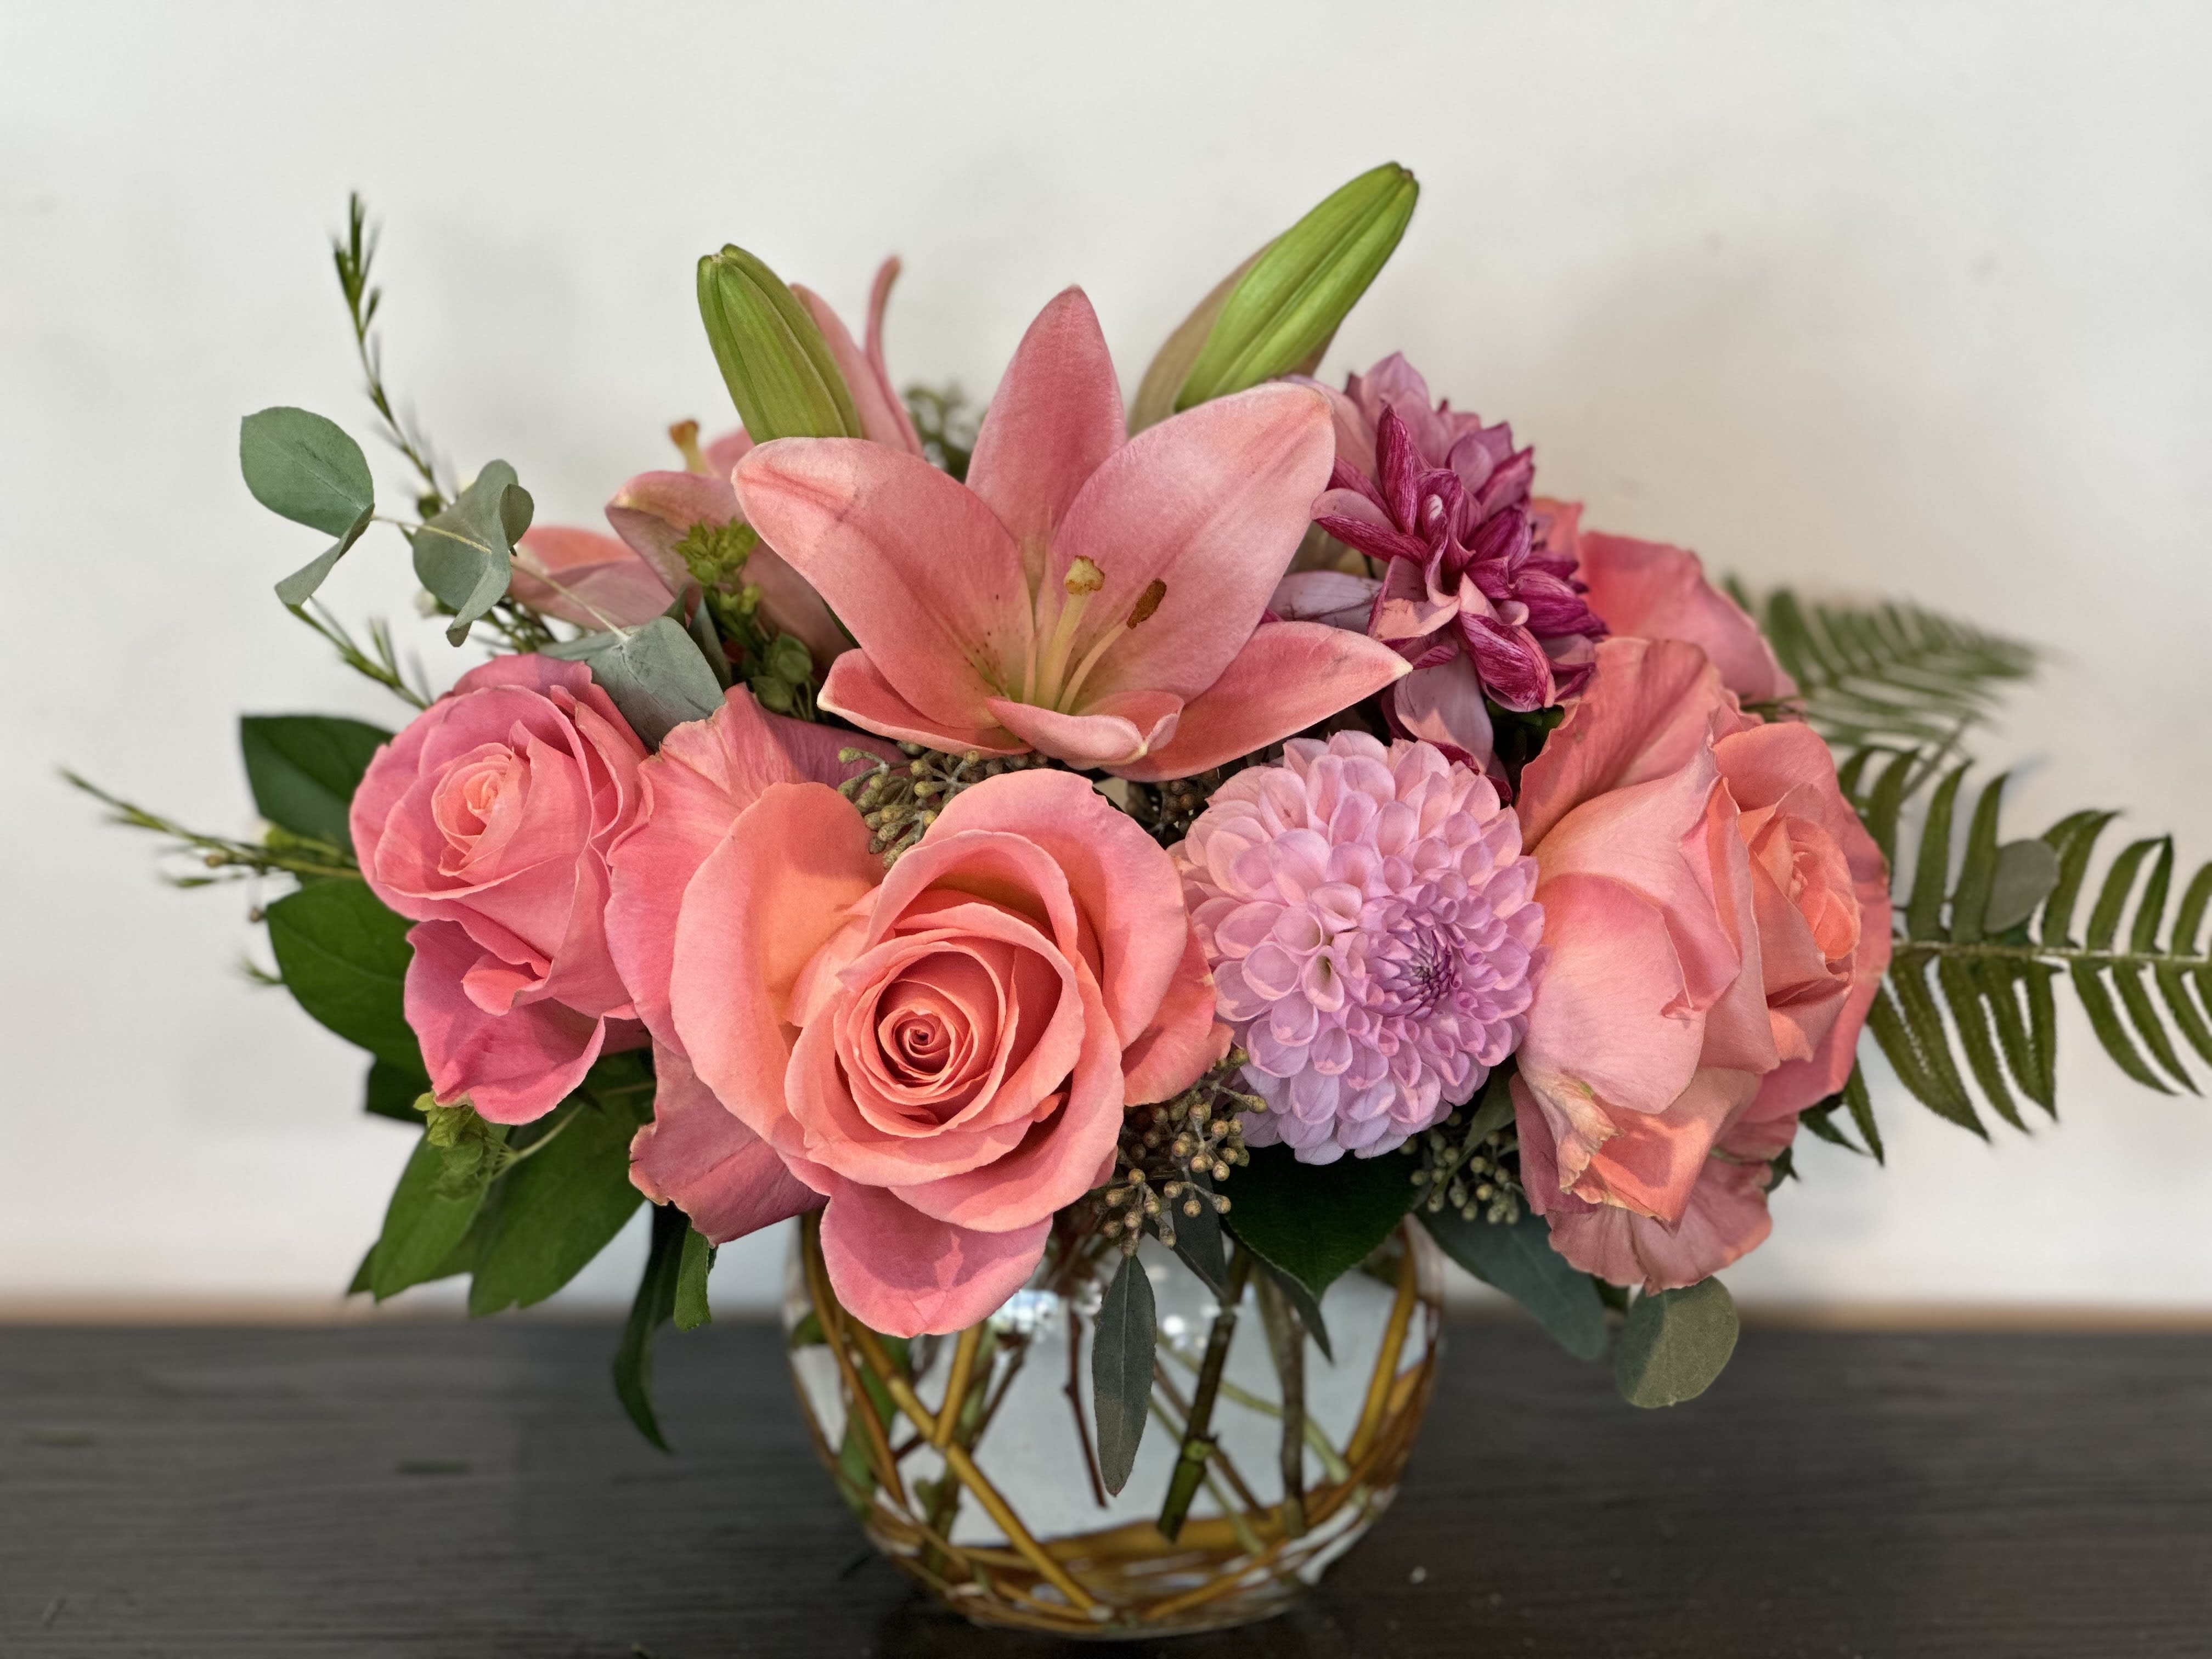 Pretty in Pinks - A lovely assortment of local flowers in shades of pink to brighten your day!